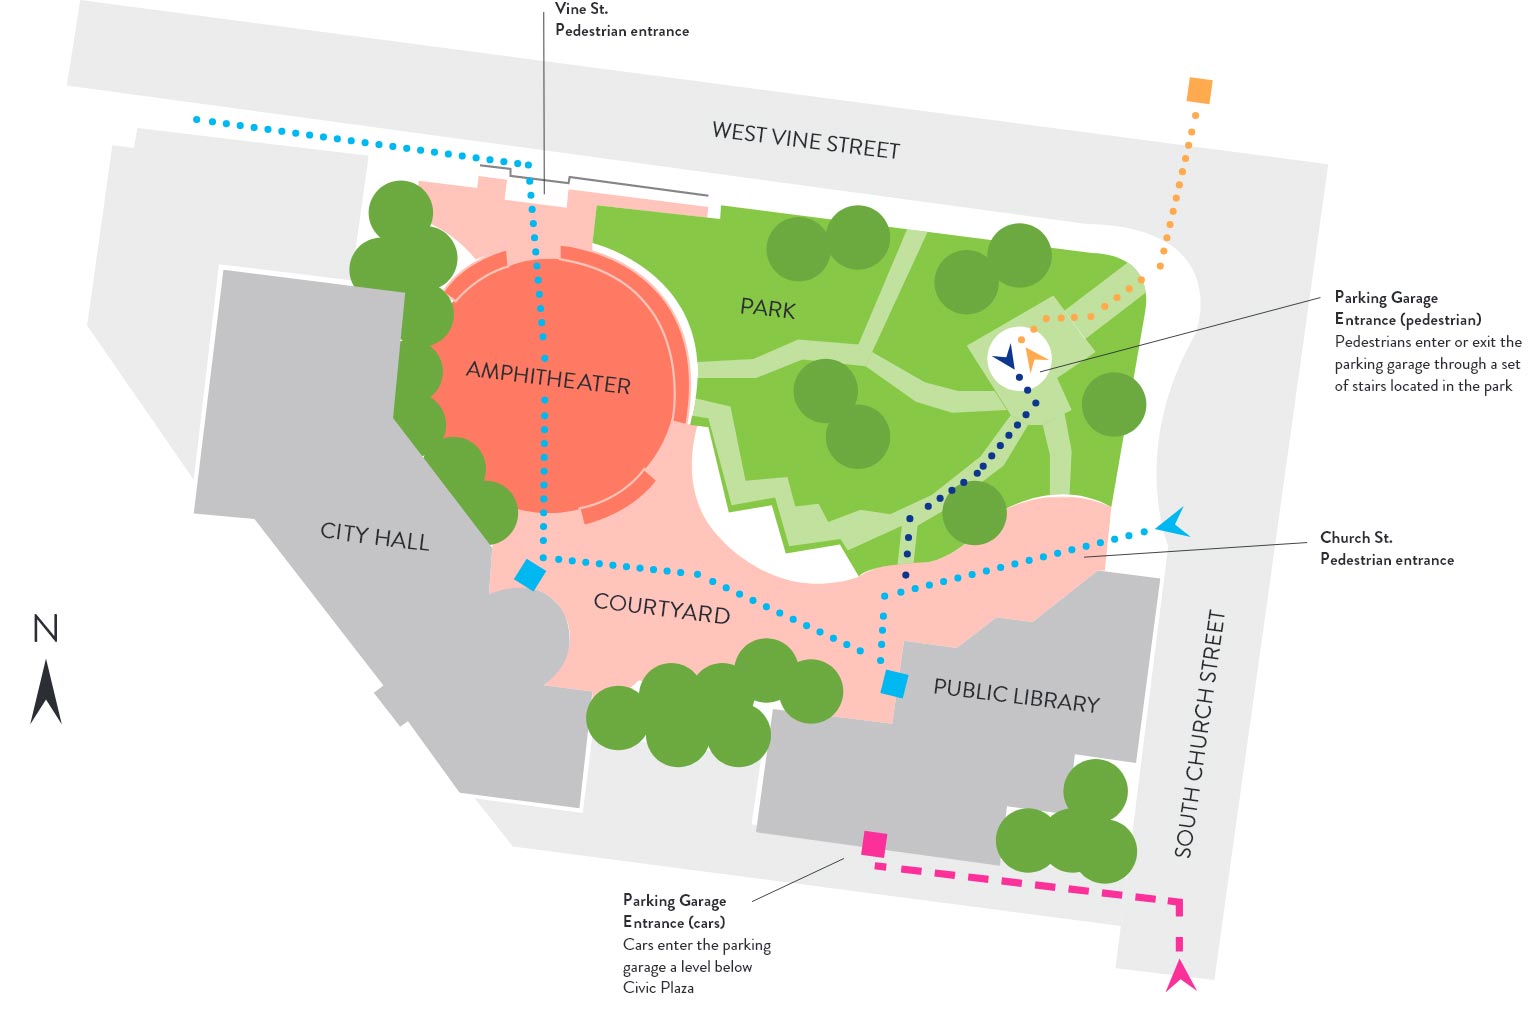 Main pathways in and out of Civic Plaza